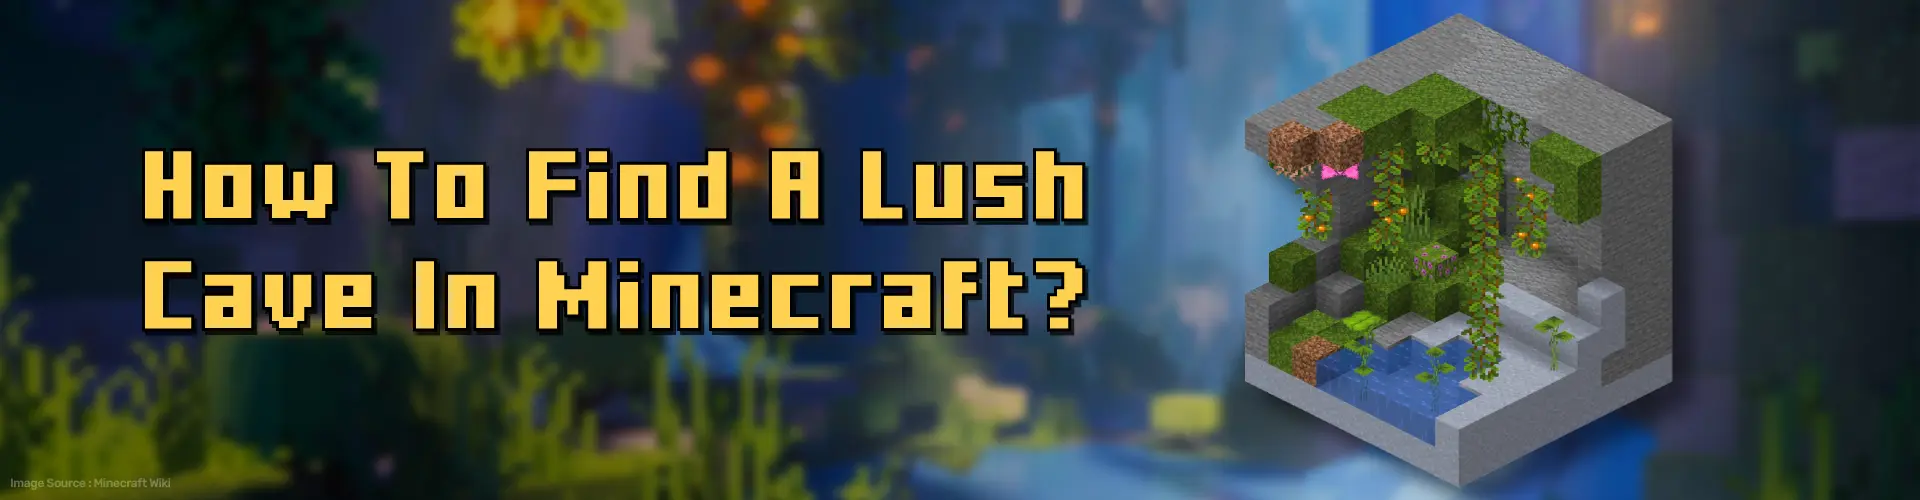 how to find a lush cave in minecraft